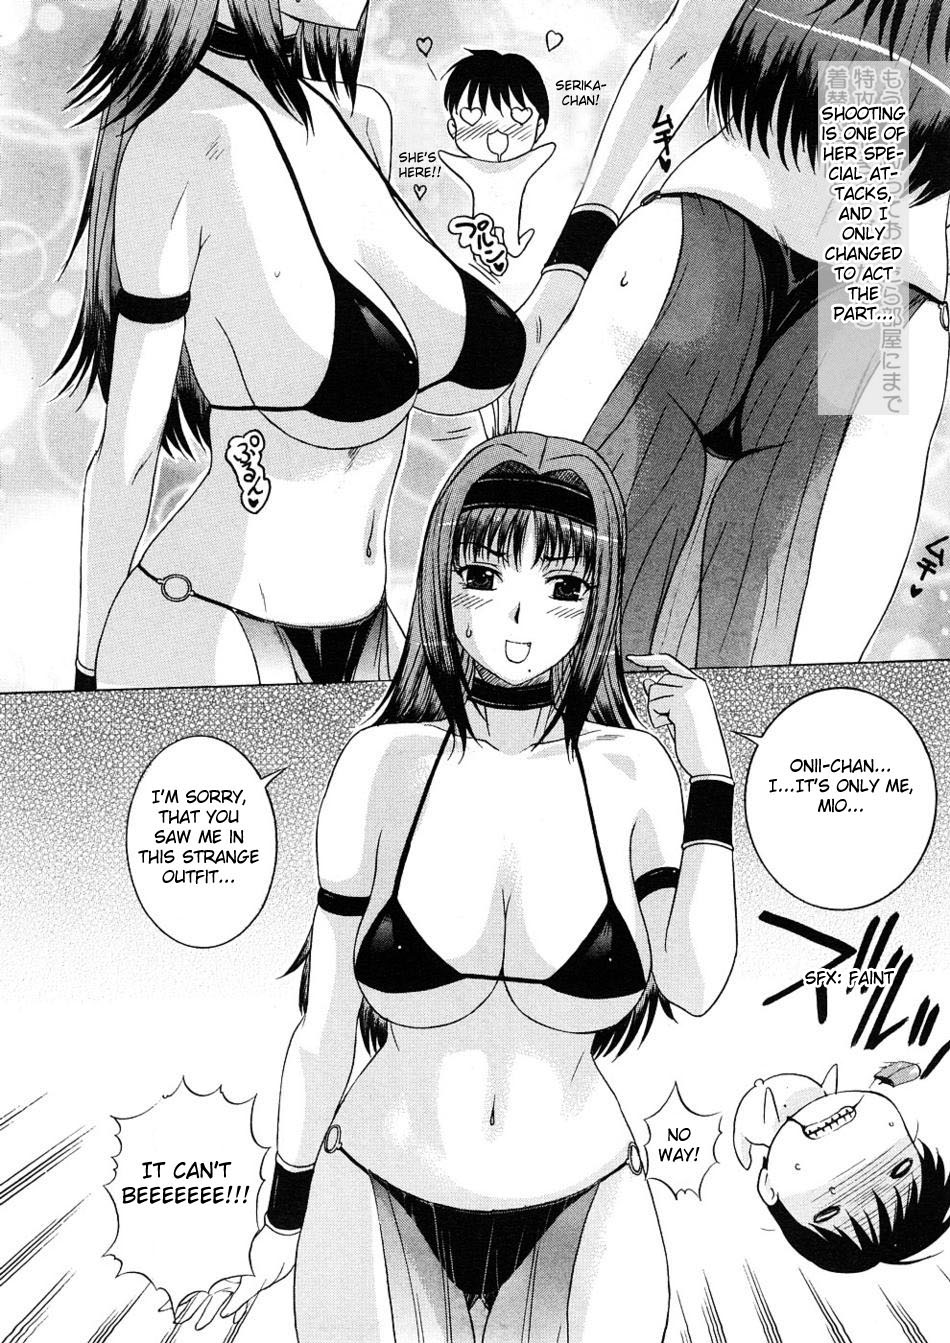 [Kusatsu Terunyo] Imokoi Musou - Younger Sister's Love Hit and Miss [ENG] page 4 full